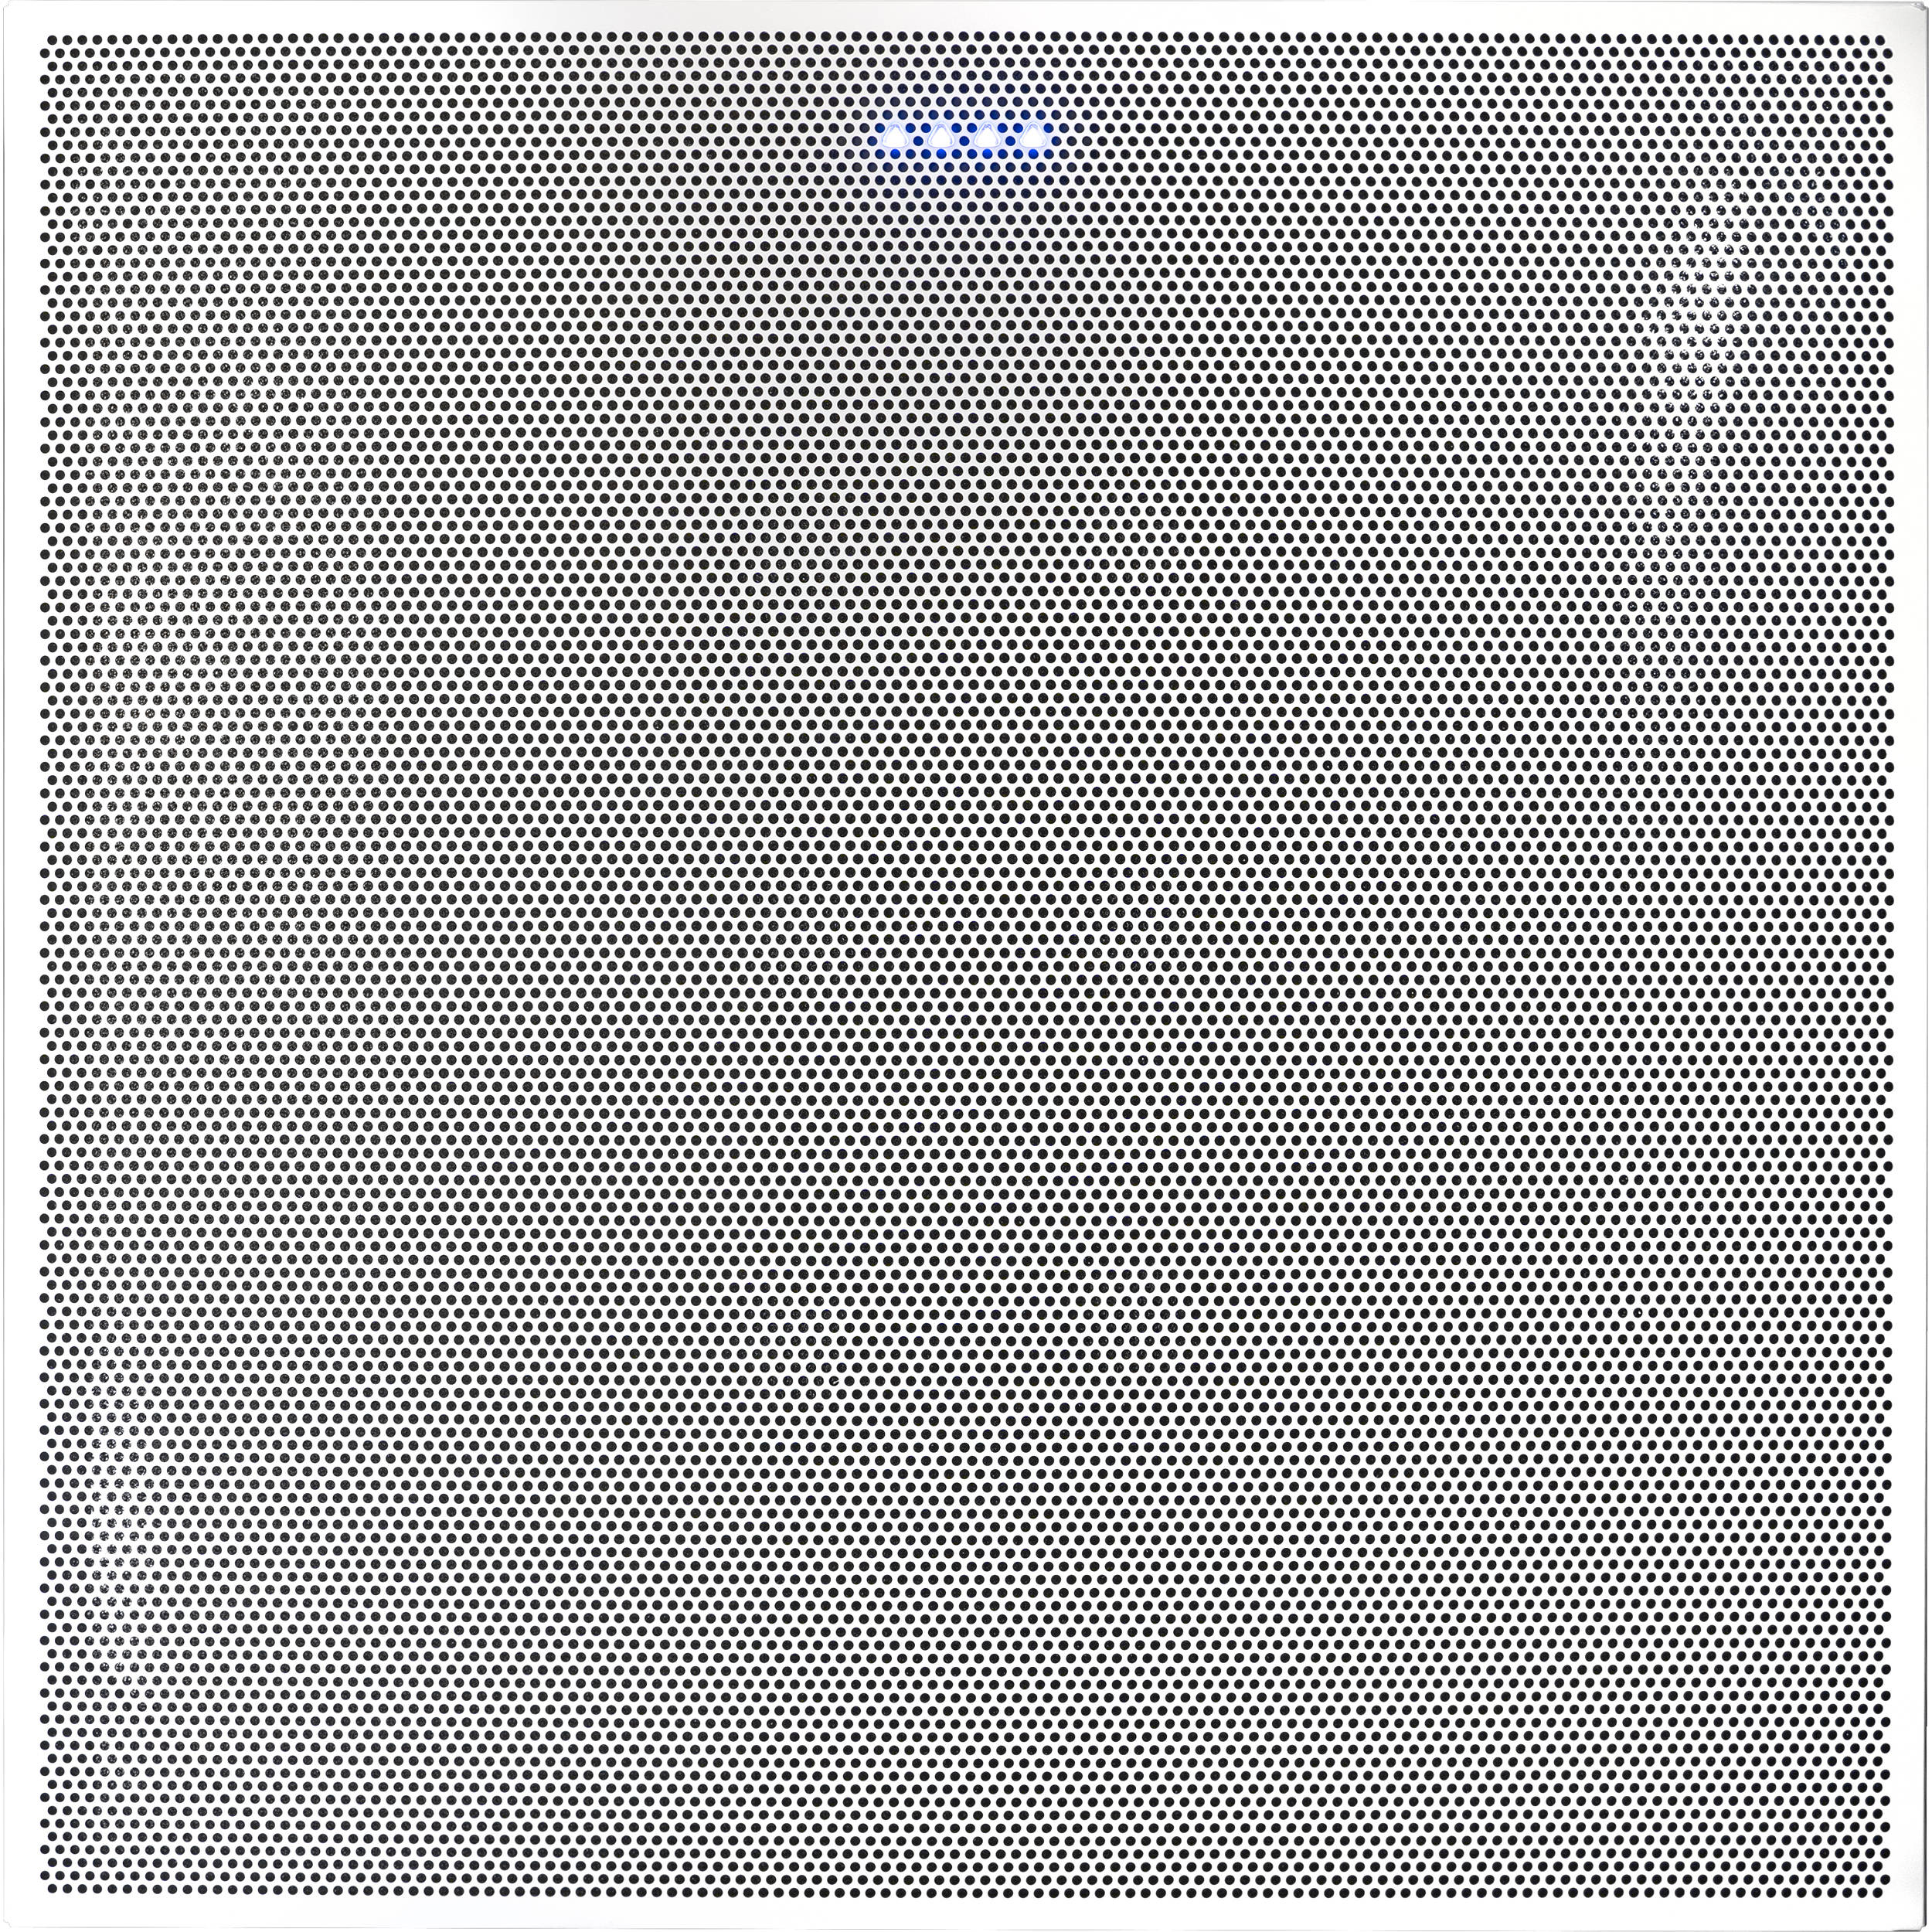 Clearone Bma Ct 600mm Ceiling Tile Beamforming Mic